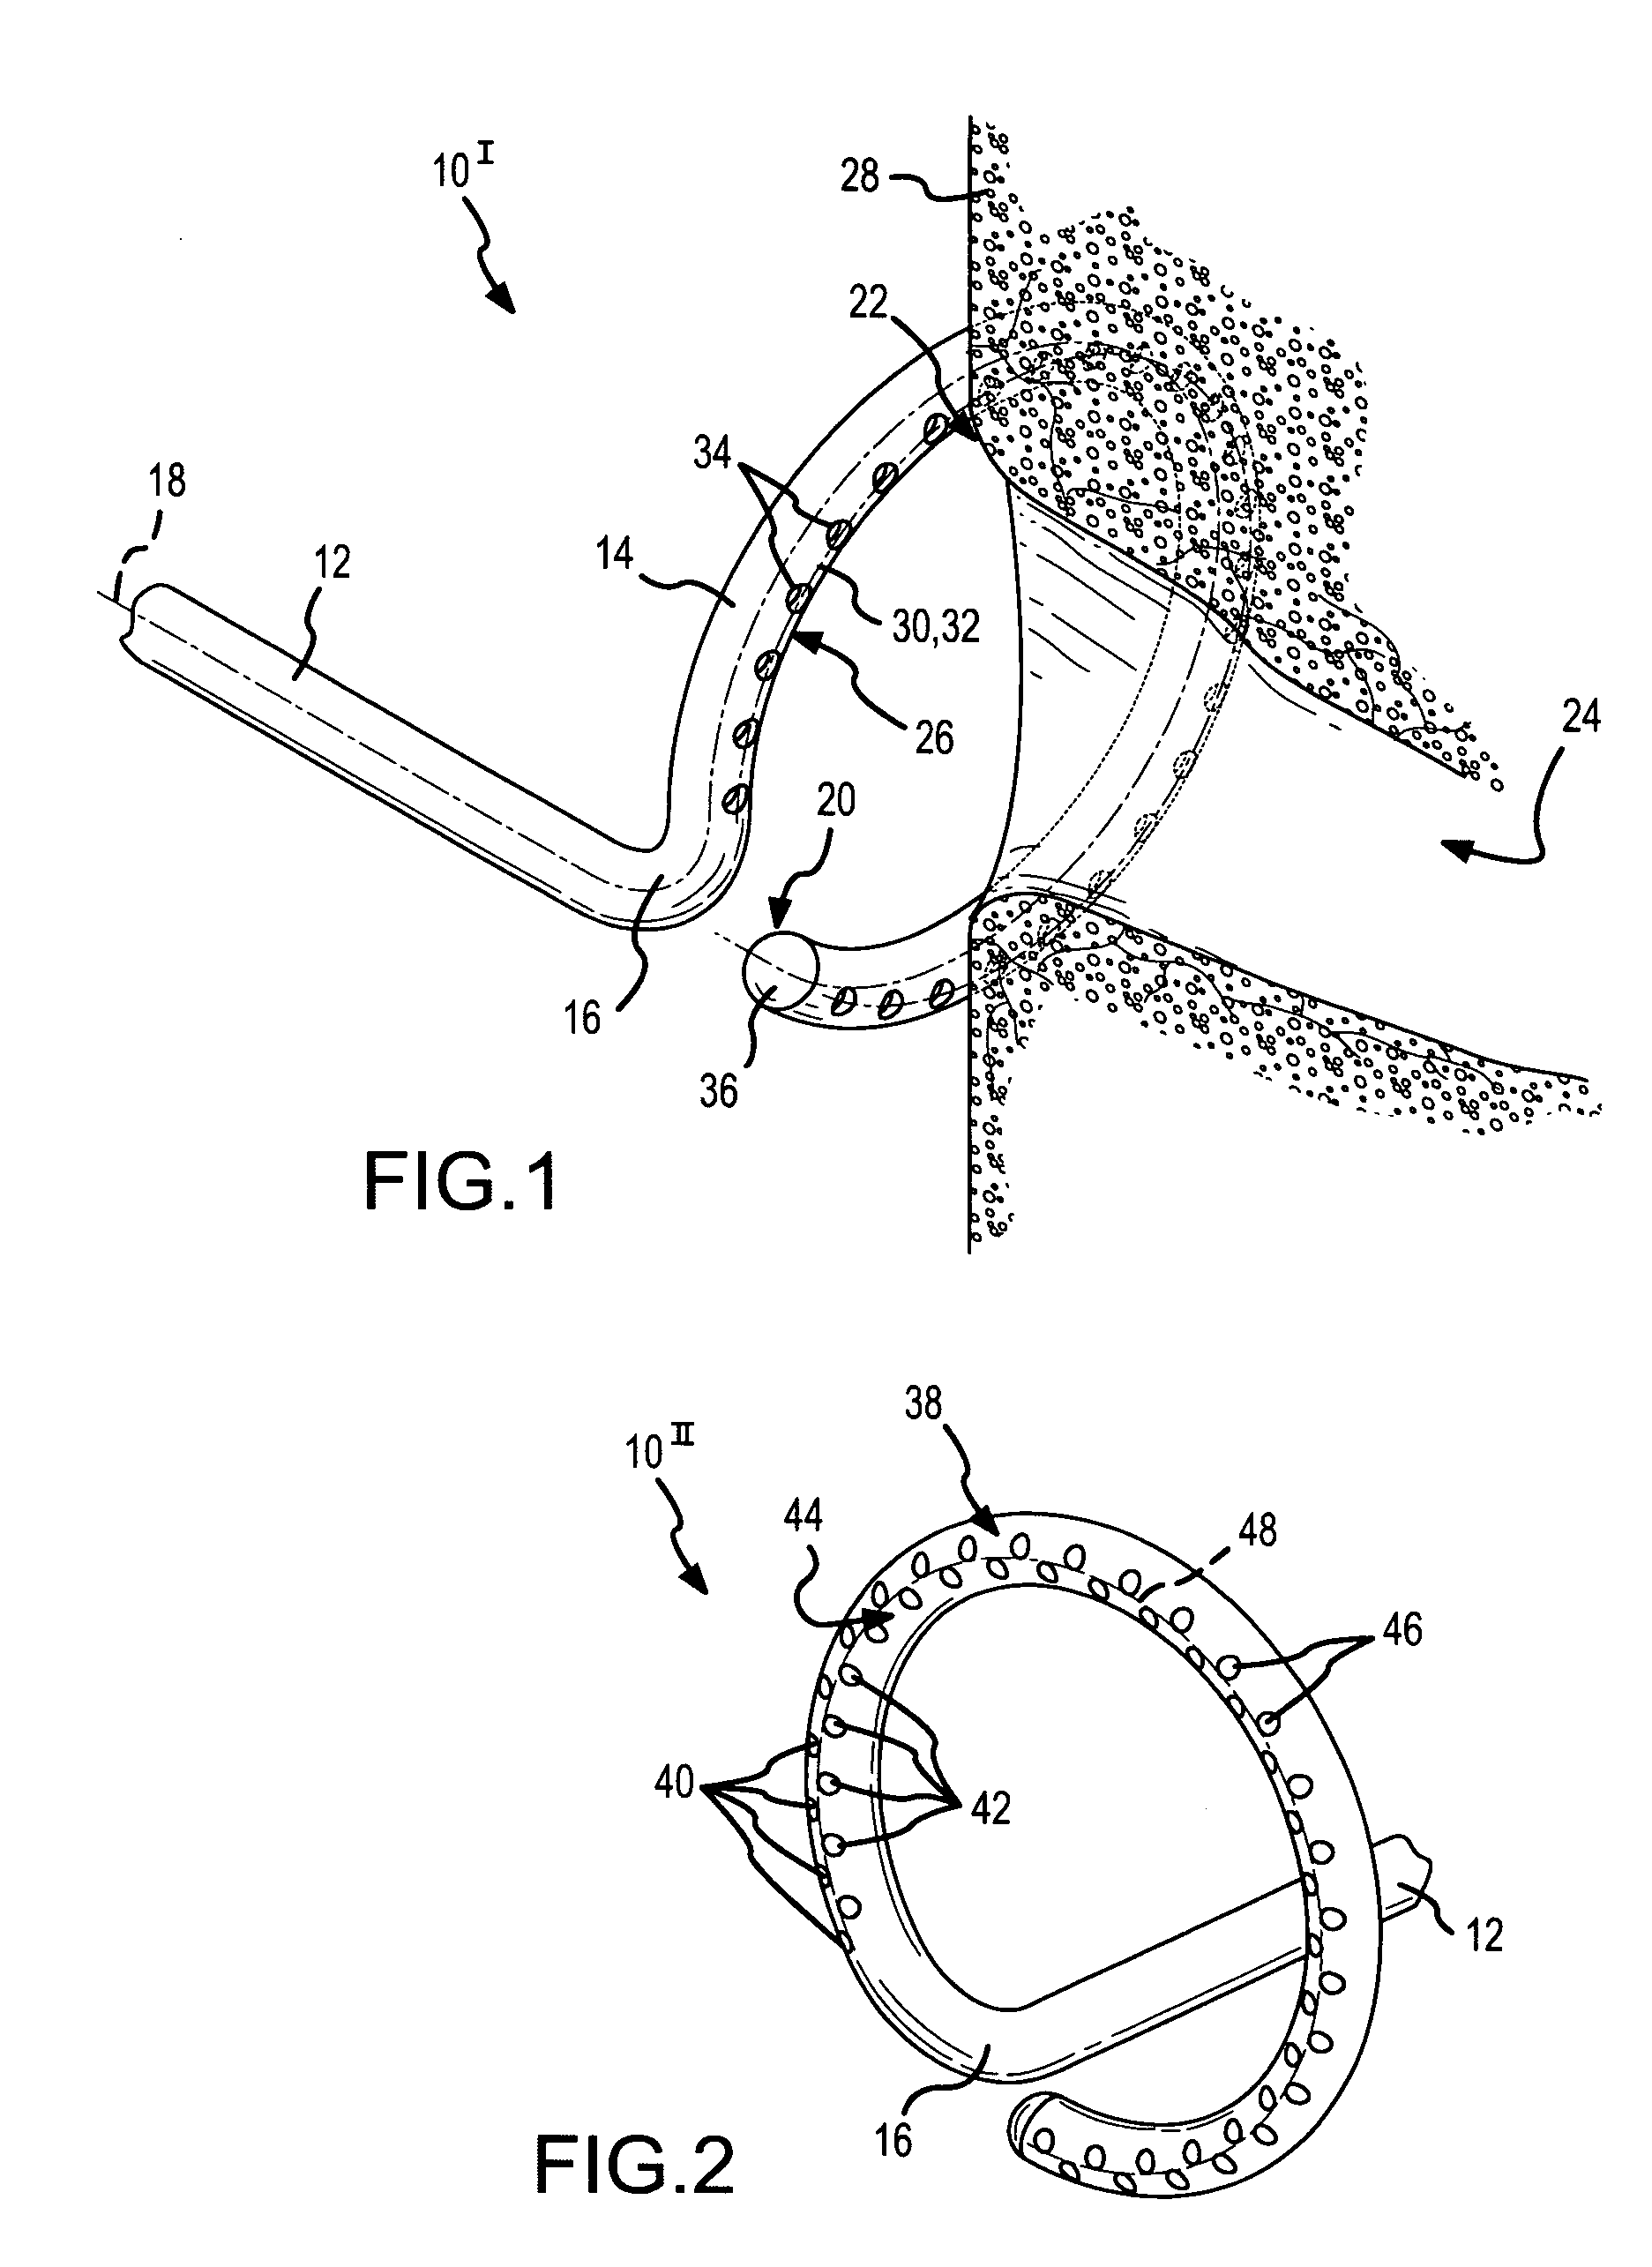 Treatment and diagnostic catheters with hydrogel electrodes